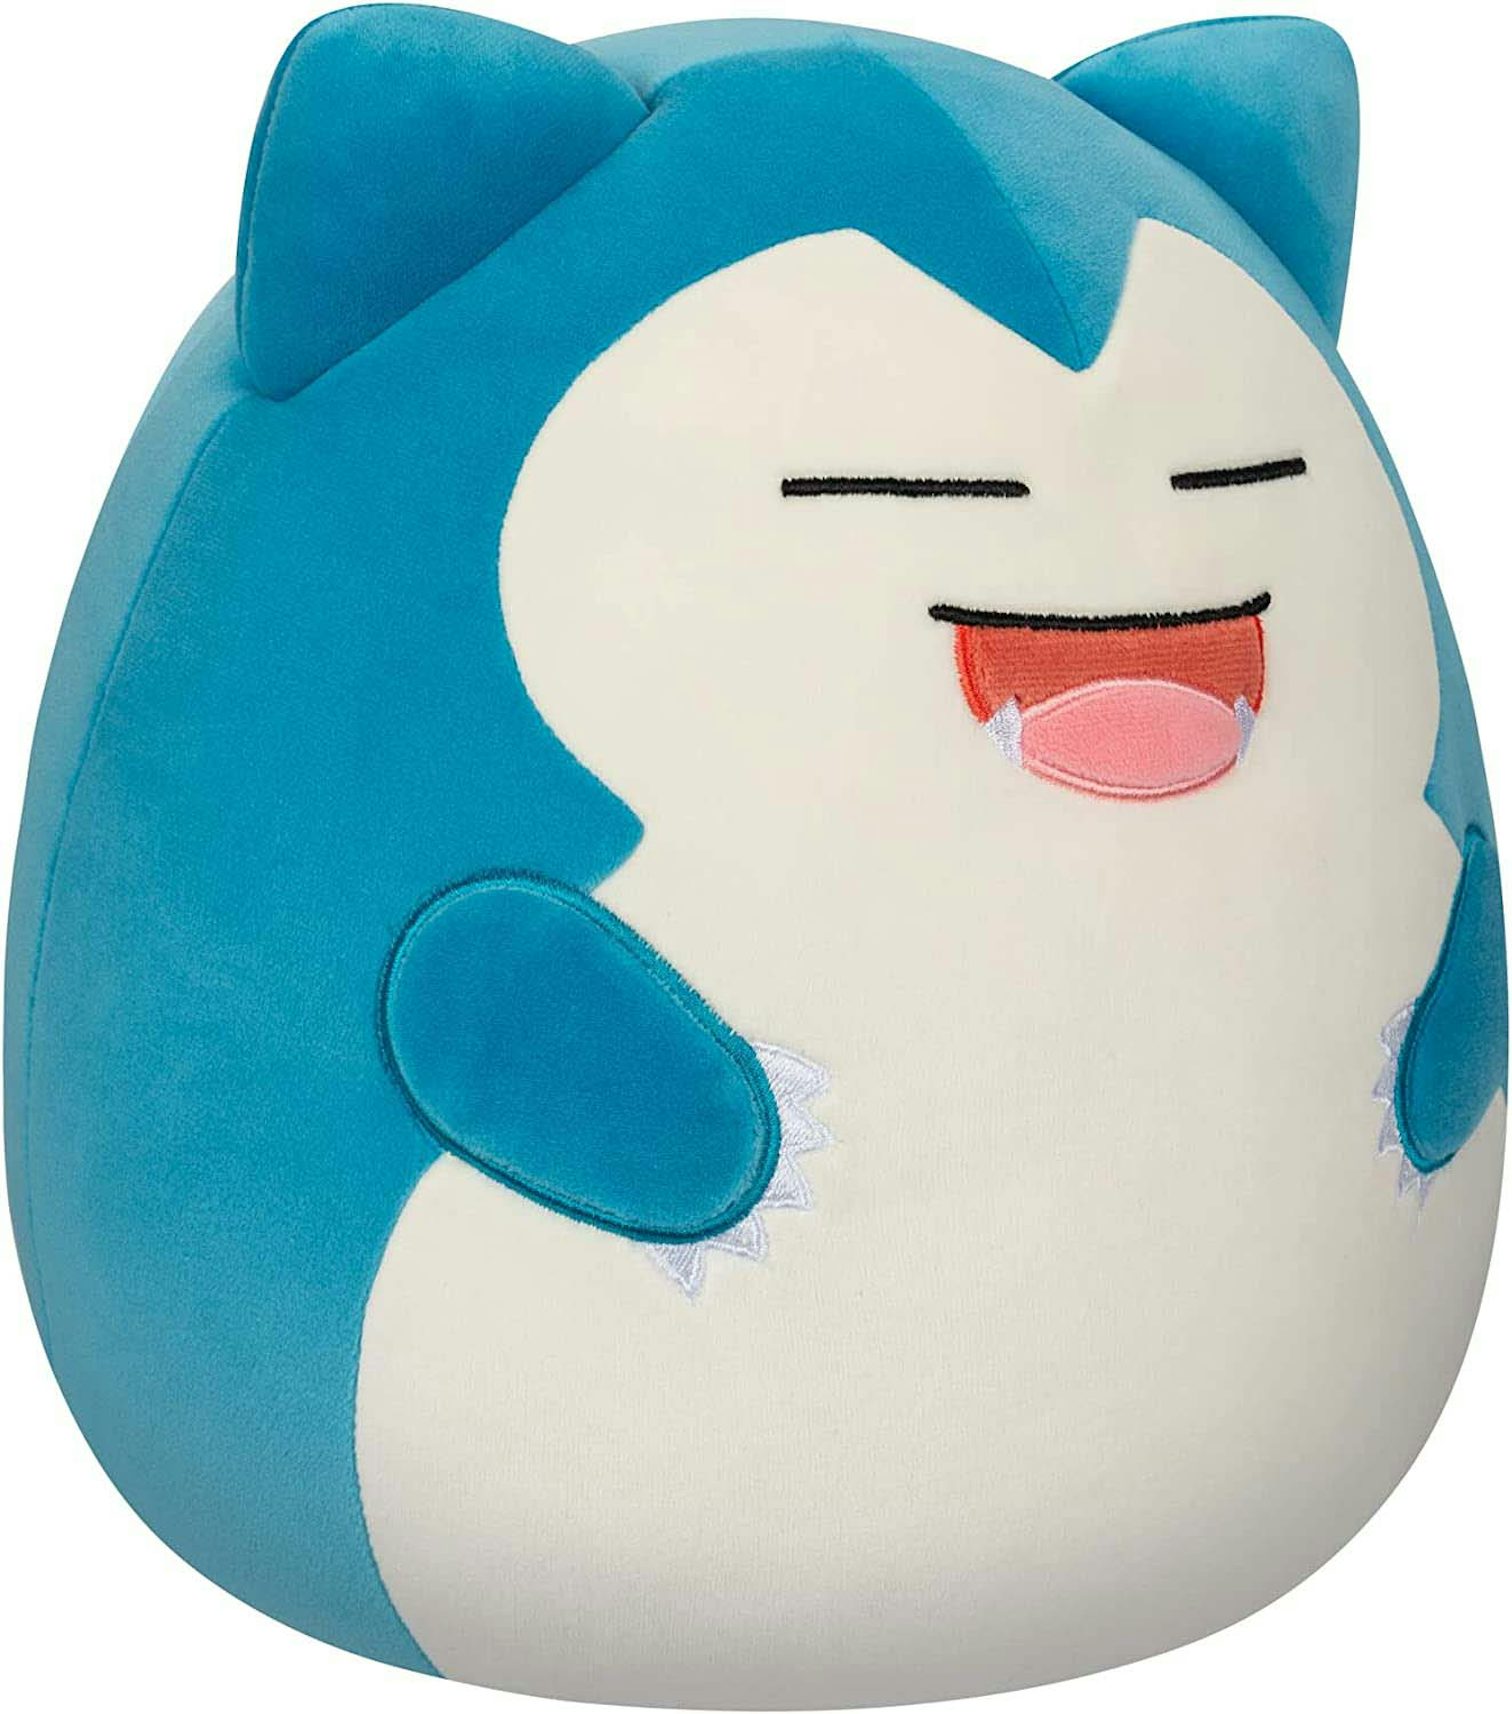 DisTrackers on X: Snorlax and Togepi Squishmallows are coming soon! .  Credit IG u/squishalert.app #Snorlax #Pokemon #Togepi #Squishmallow # Squishmallows #Plus #PokemonCollector #PokemonNews   / X